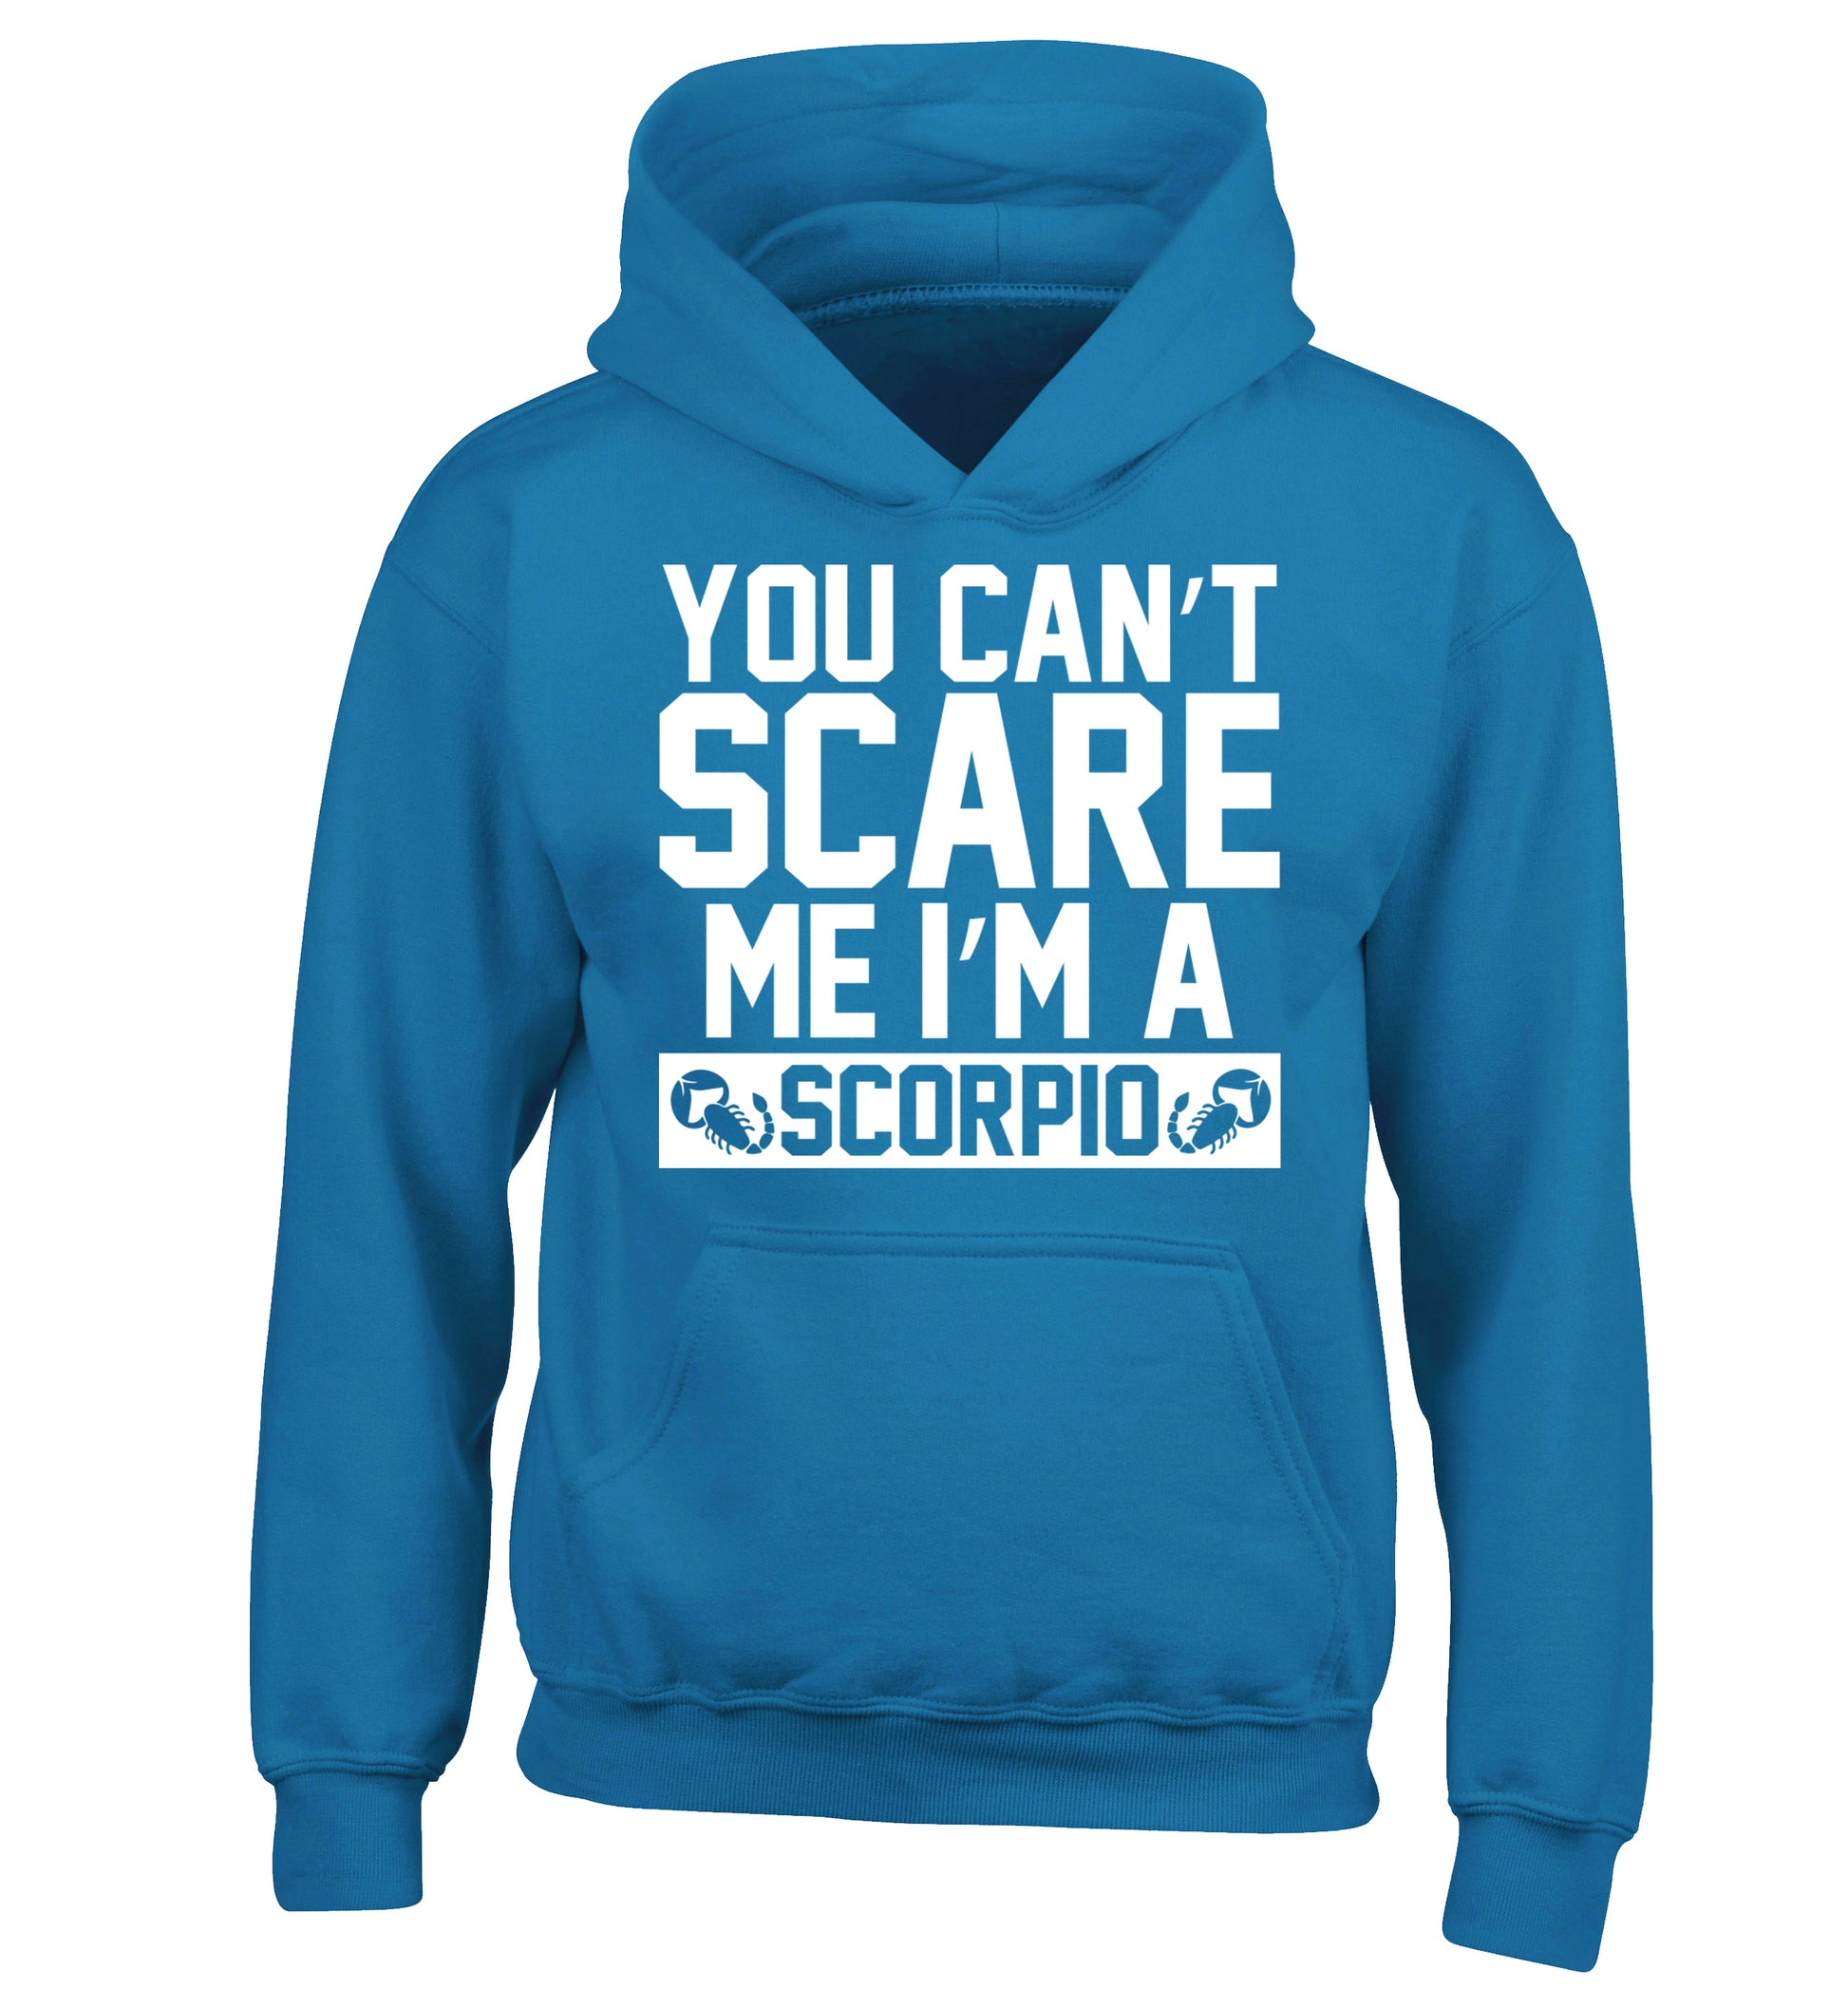 You can't scare me I'm a scorpio children's blue hoodie 12-13 Years